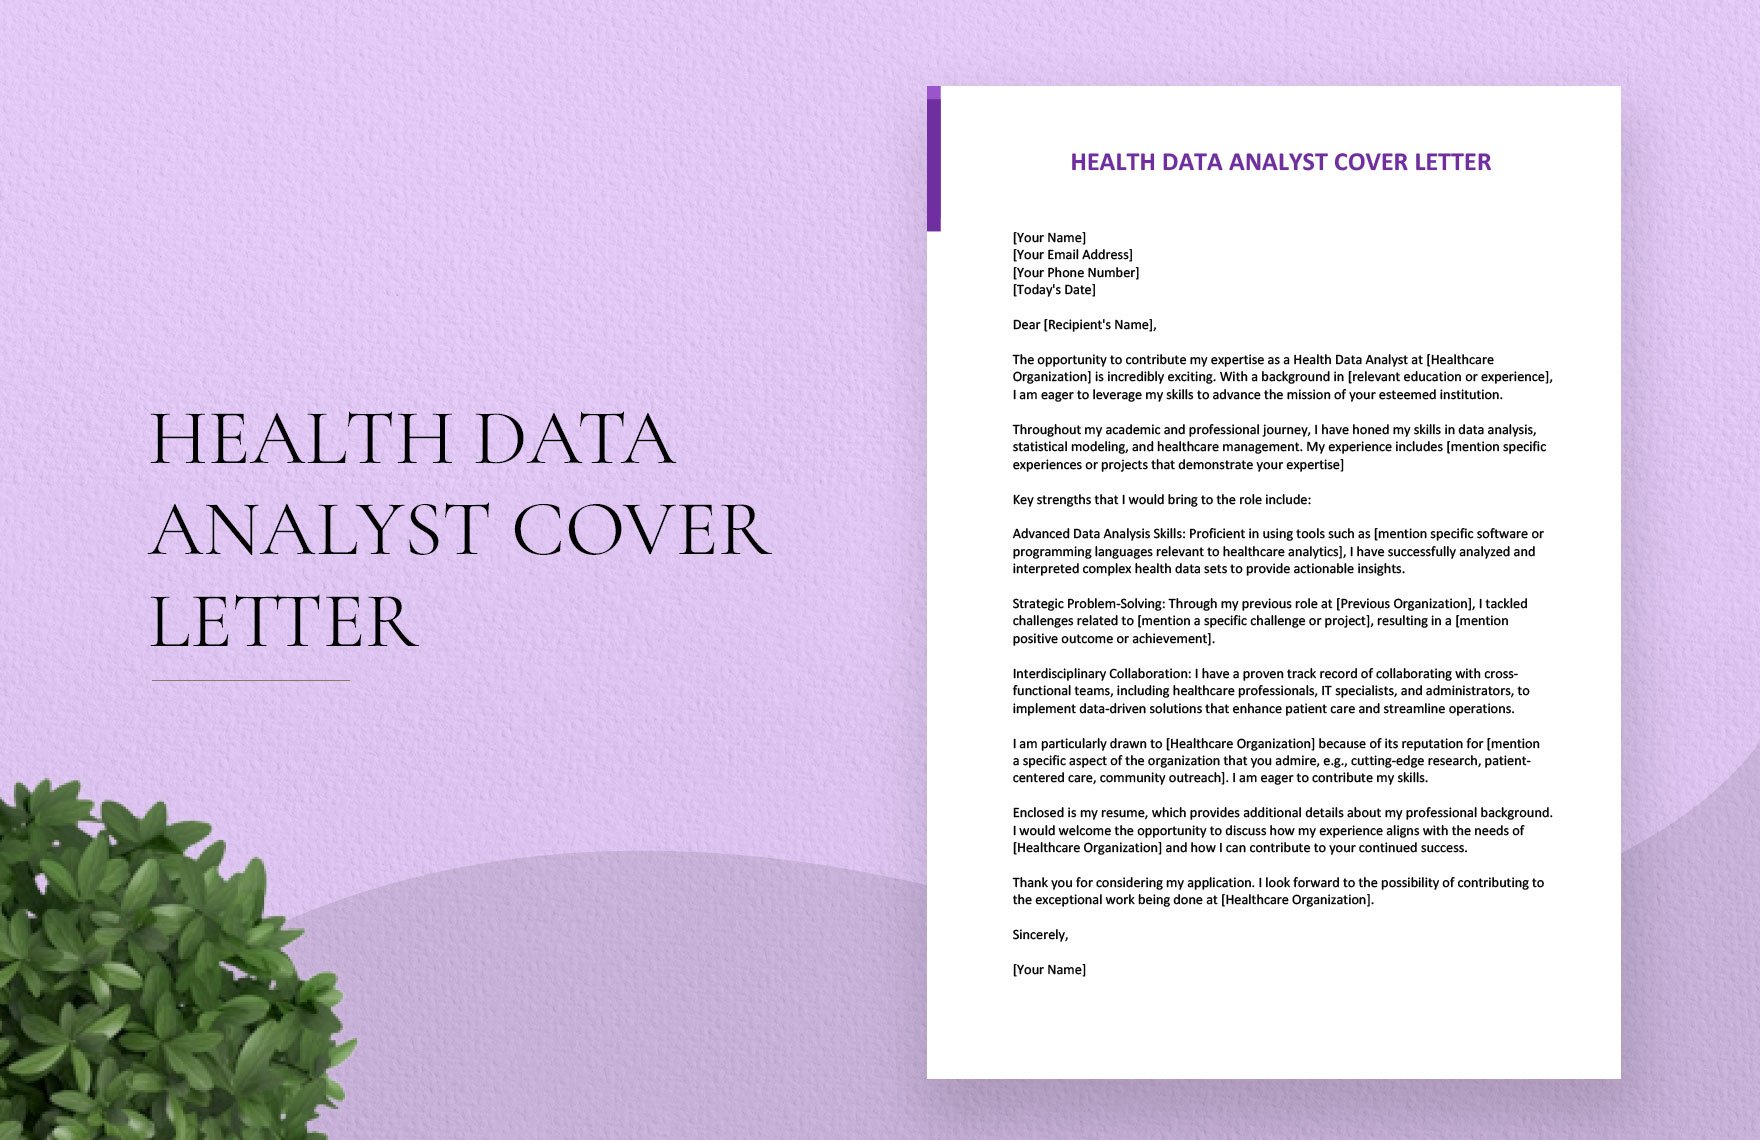 Health Data Analyst Cover Letter